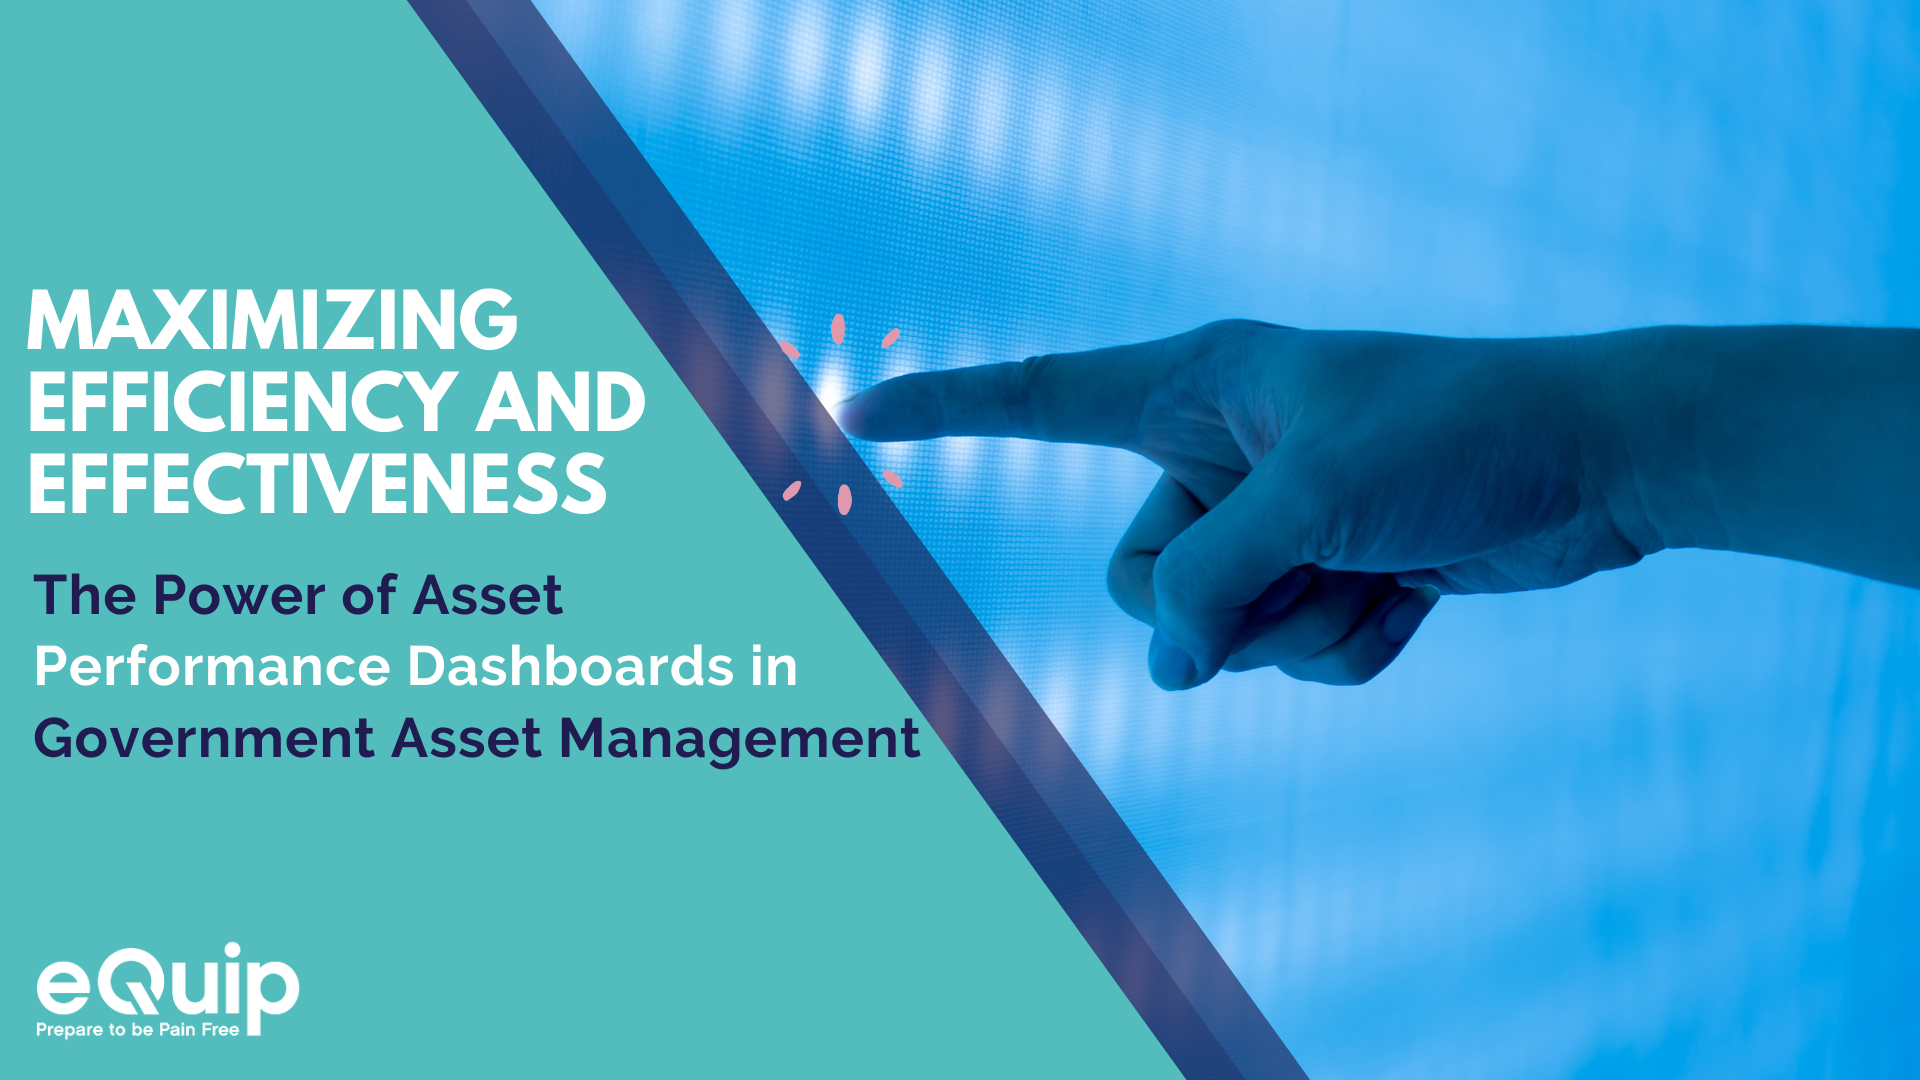 Maximizing Efficiency and Effectiveness: The Power of Asset Performance Dashboards in Government Asset Management